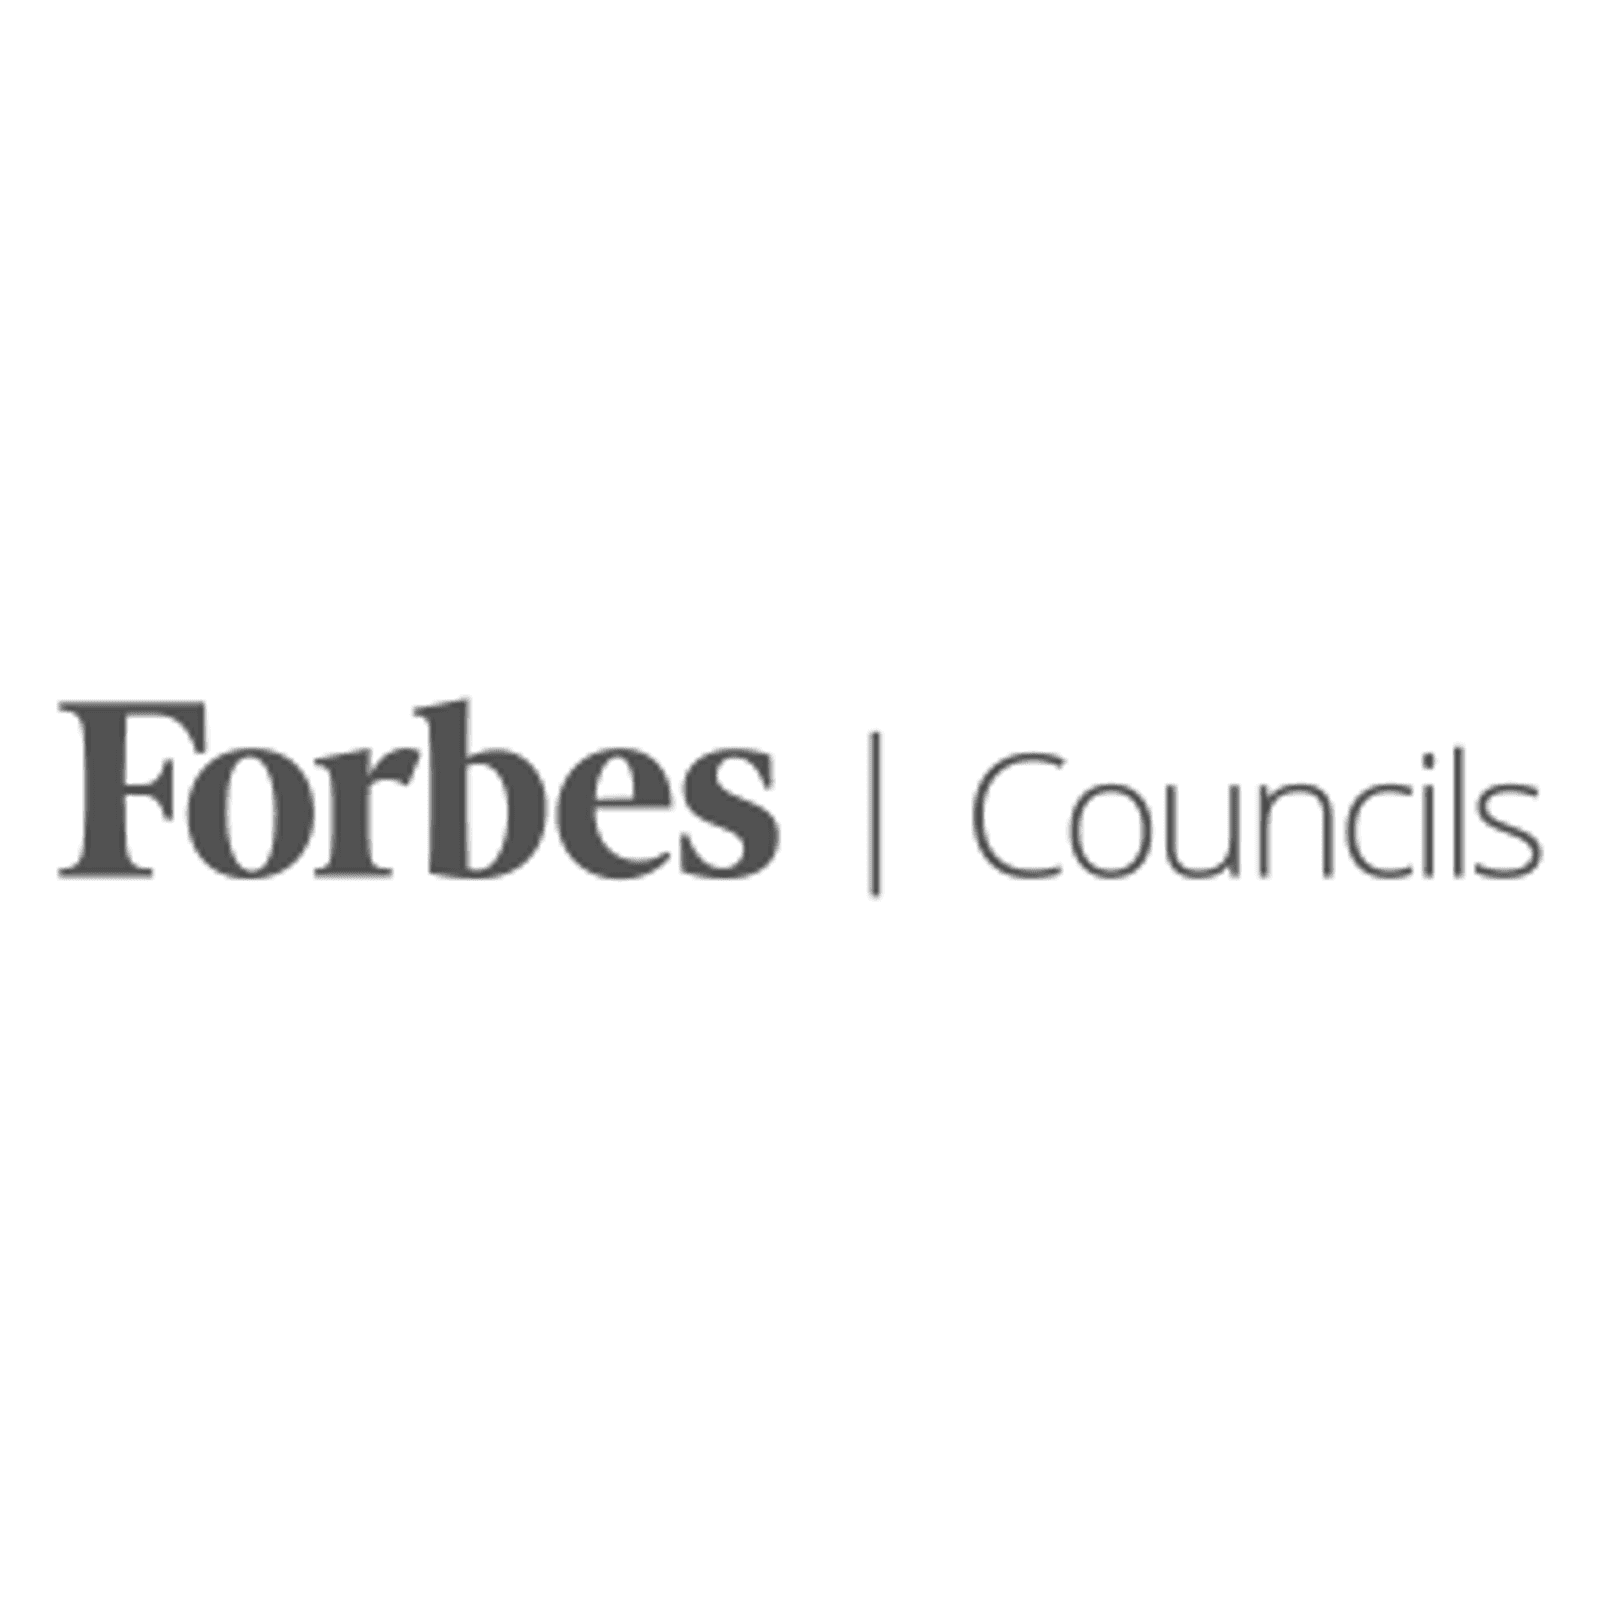 Forbes councils